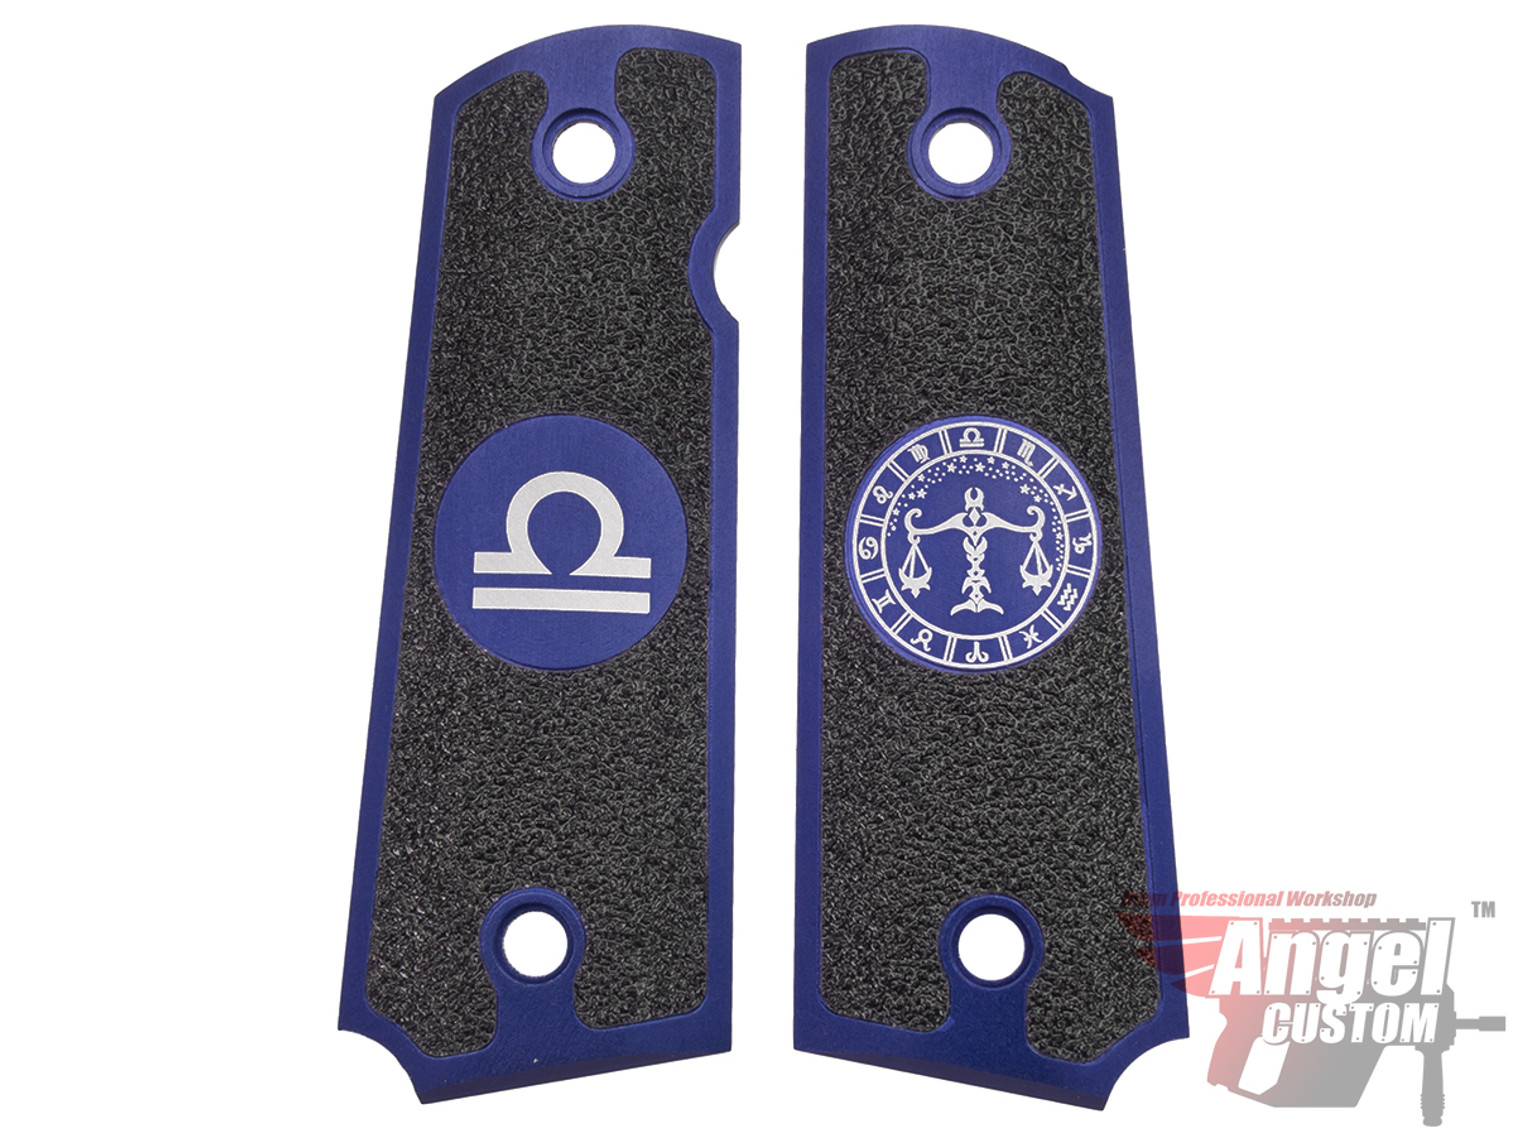 Angel Custom CNC Machined Tac-Glove "Zodiac" Grips for Tokyo Marui/KWA/Western Arms 1911 Series Airsoft Pistols - Navy Blue (Sign: Libra)